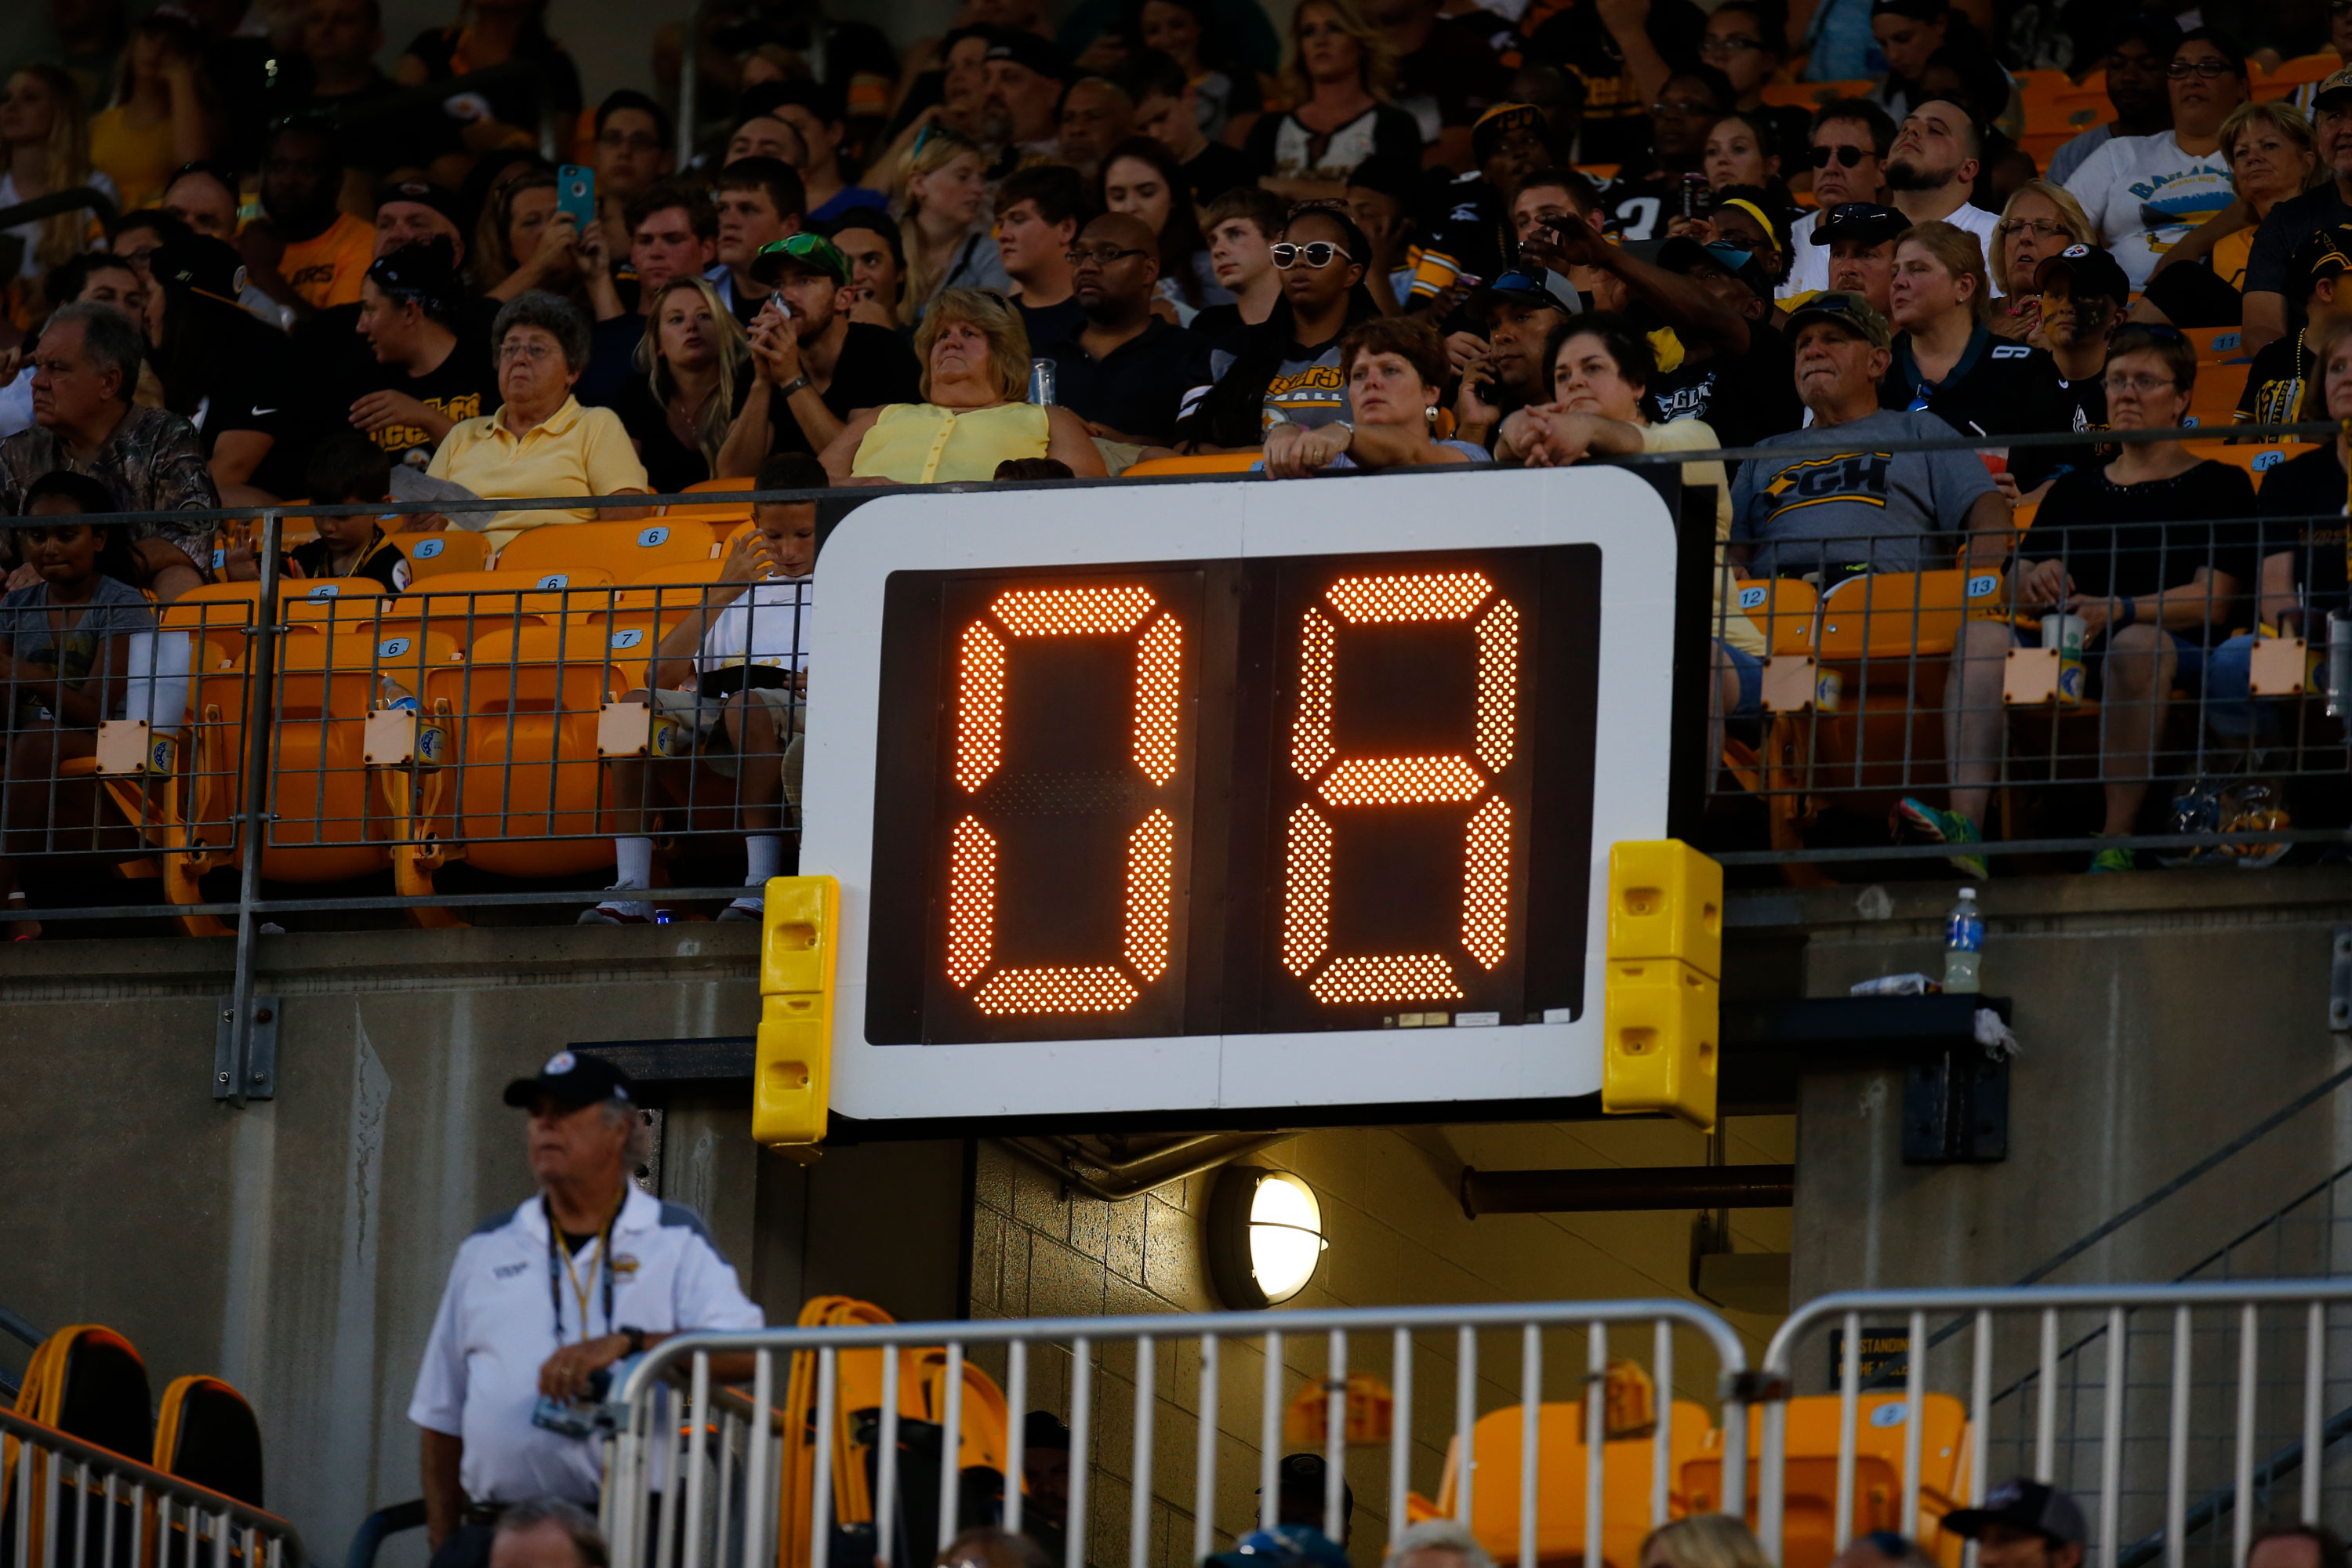 TGL Presented by SoFi to Include Shot Clock, Timeouts and a Referee